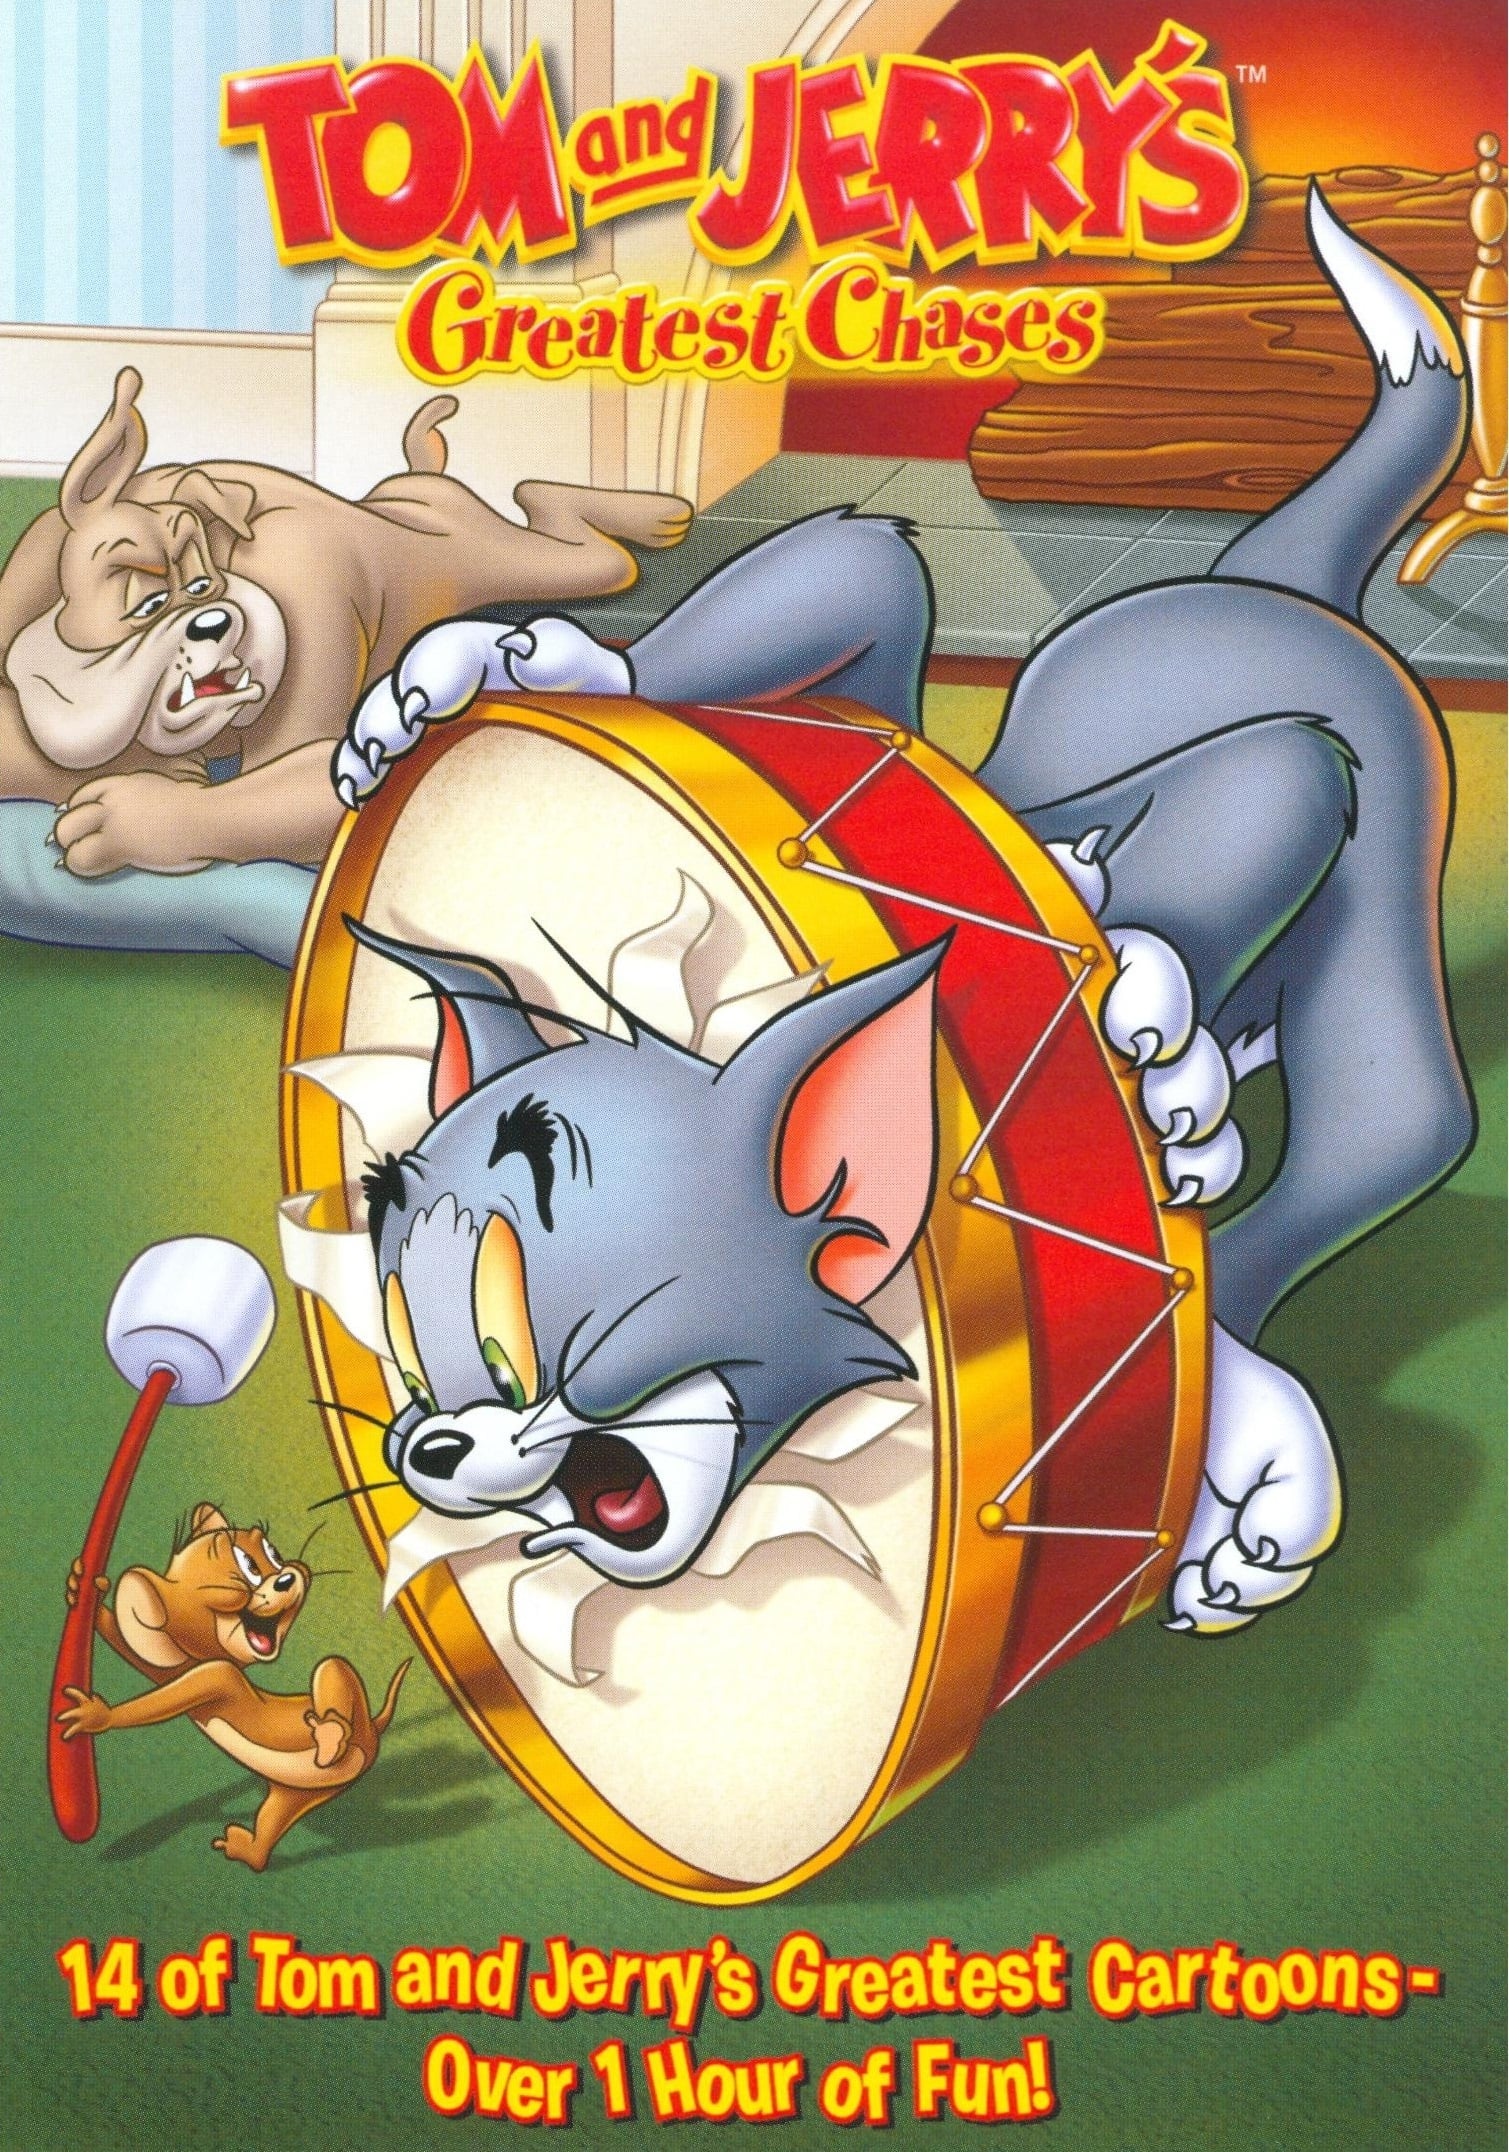 Tom and Jerry's Greatest Chases, Vol. 2